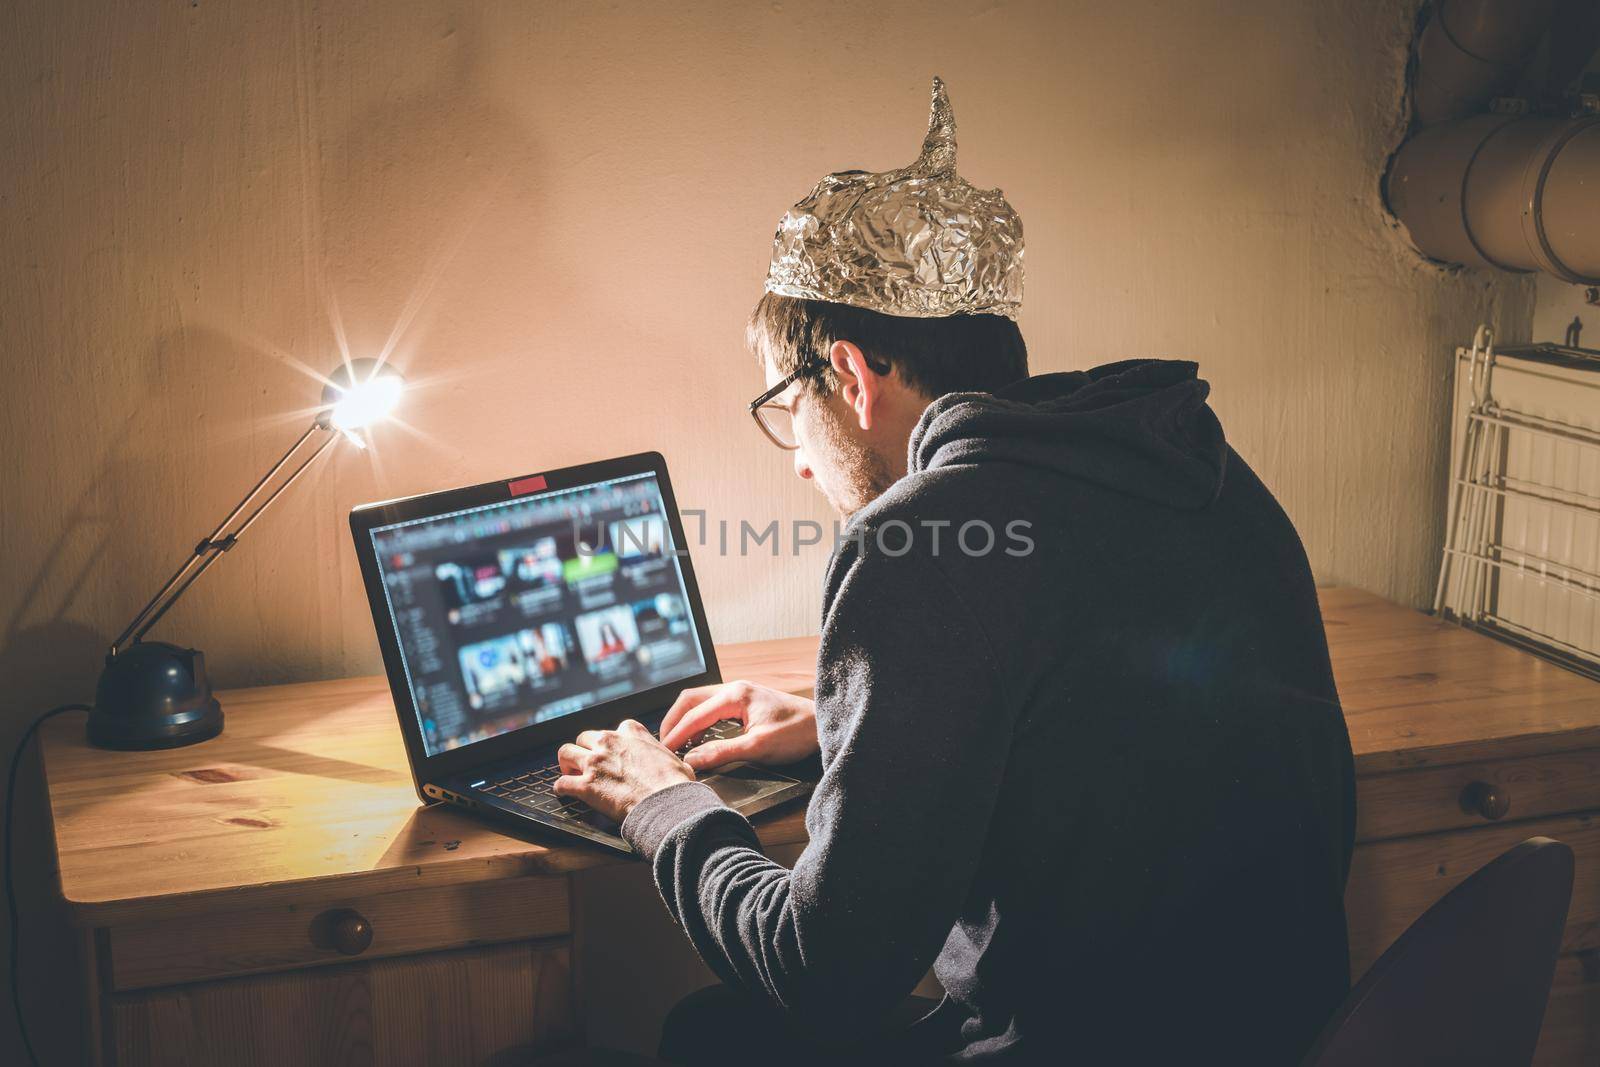 Conspiracy theory concept: young man with aluminum cap searching the internet, sitting lonely in the dark basement by Daxenbichler